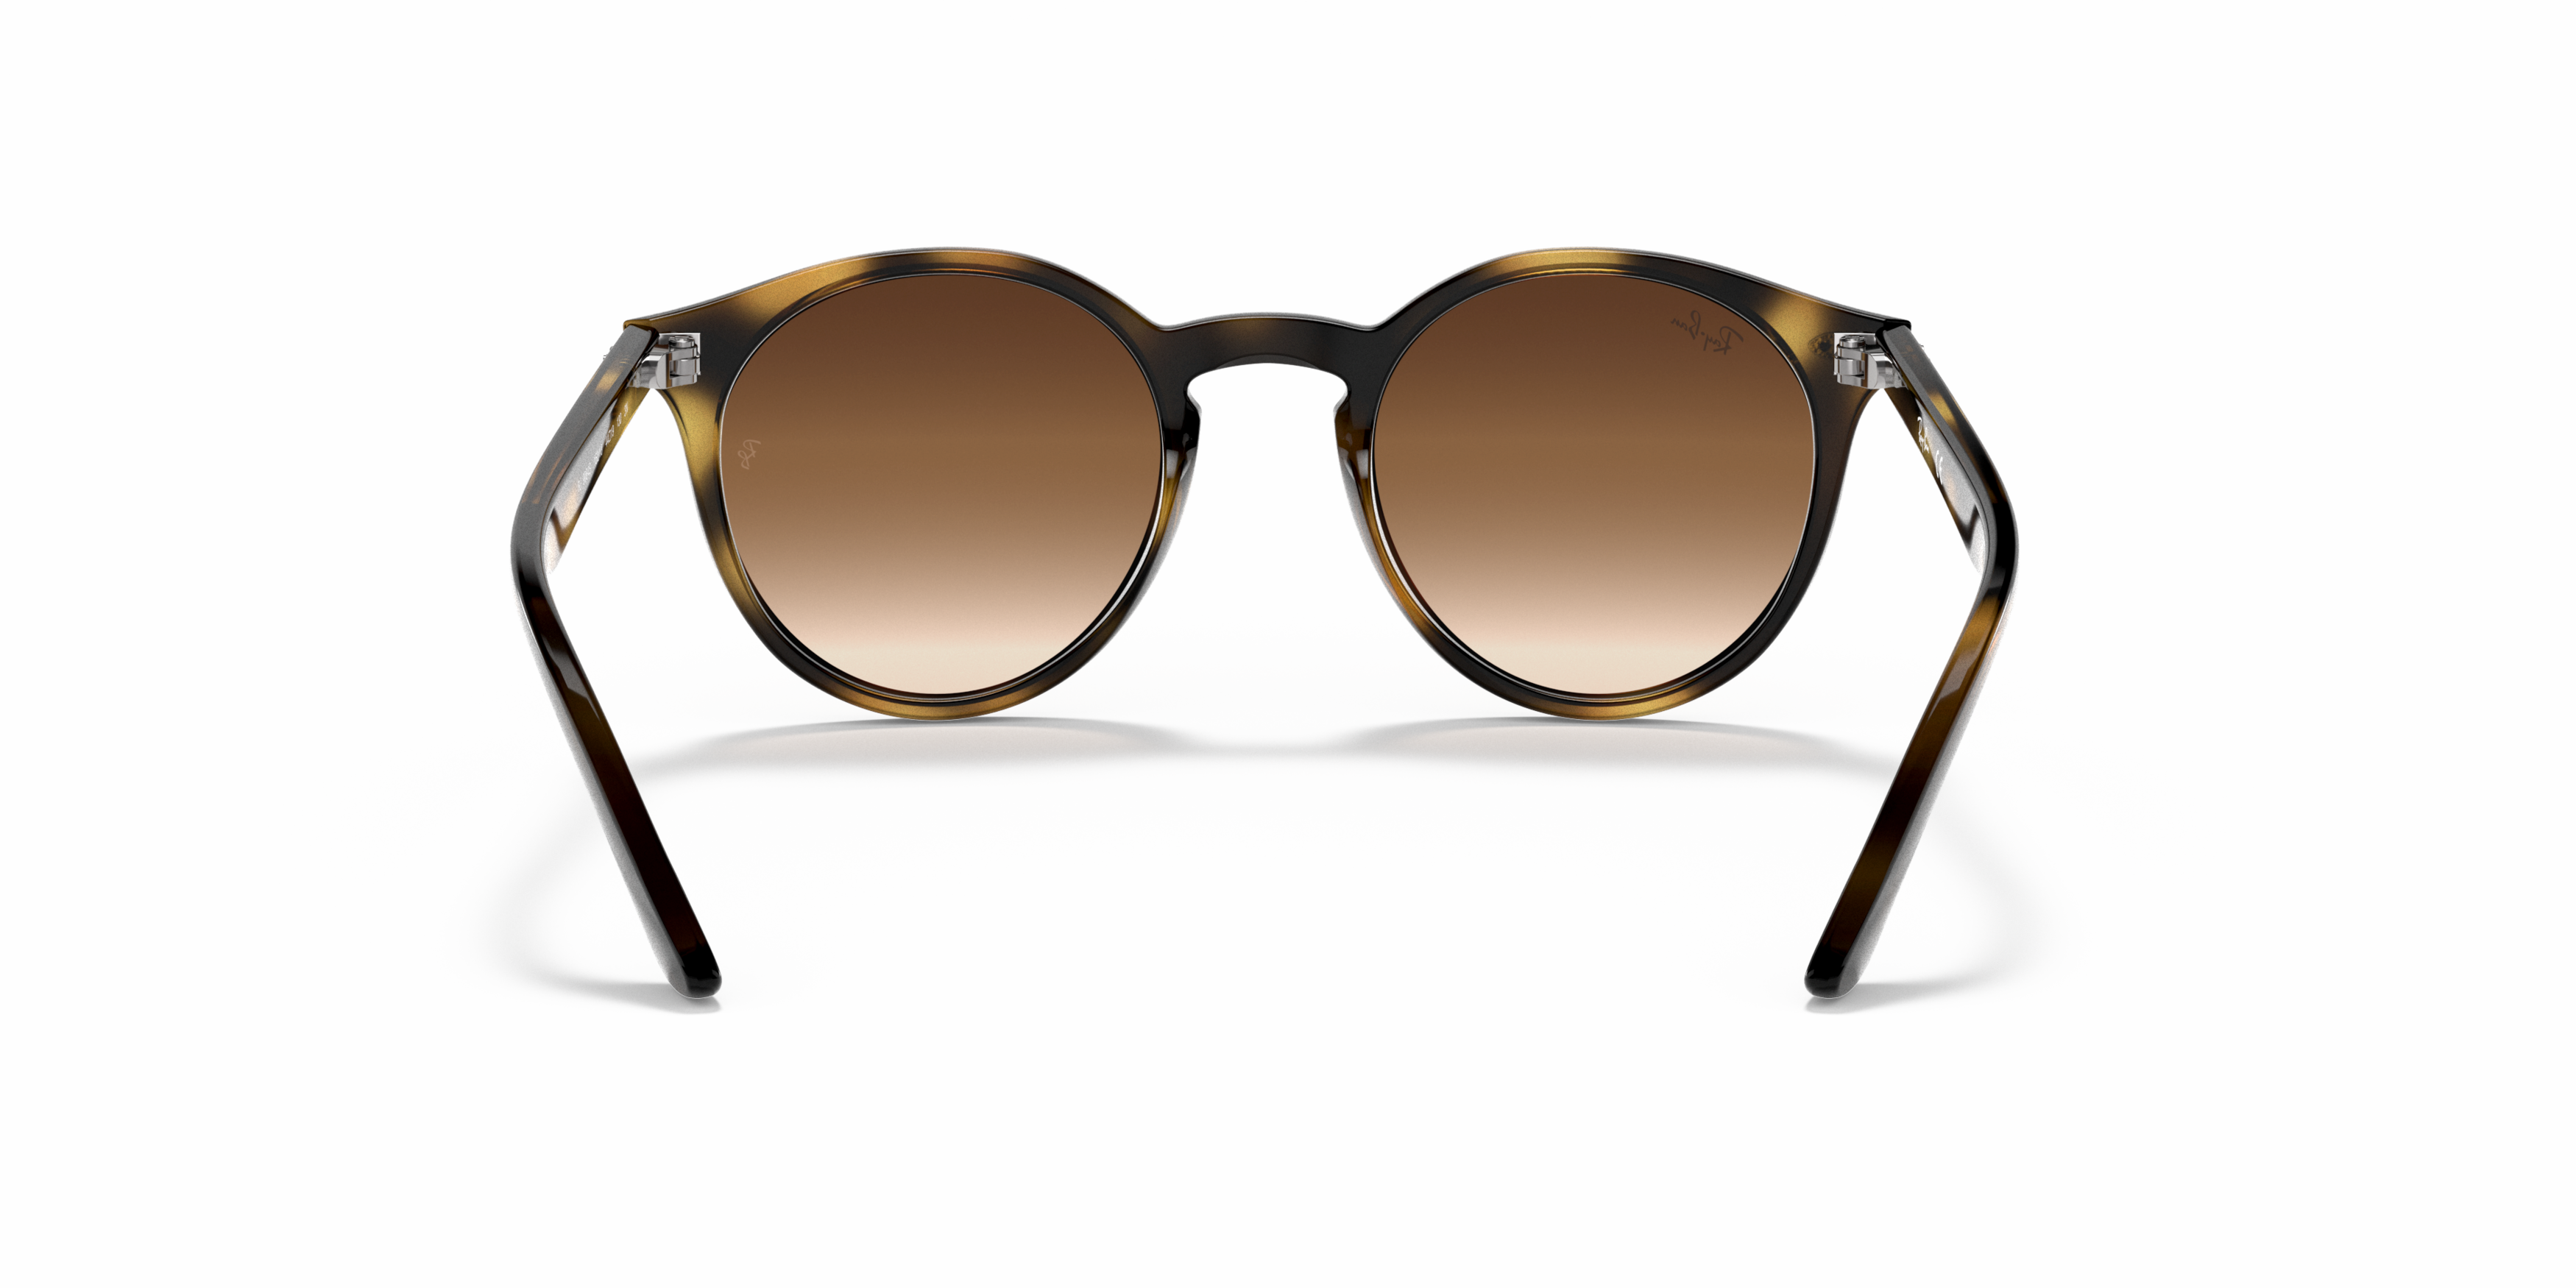 [products.image.detail02] Ray Ban Junior 0RJ9064S 152/13